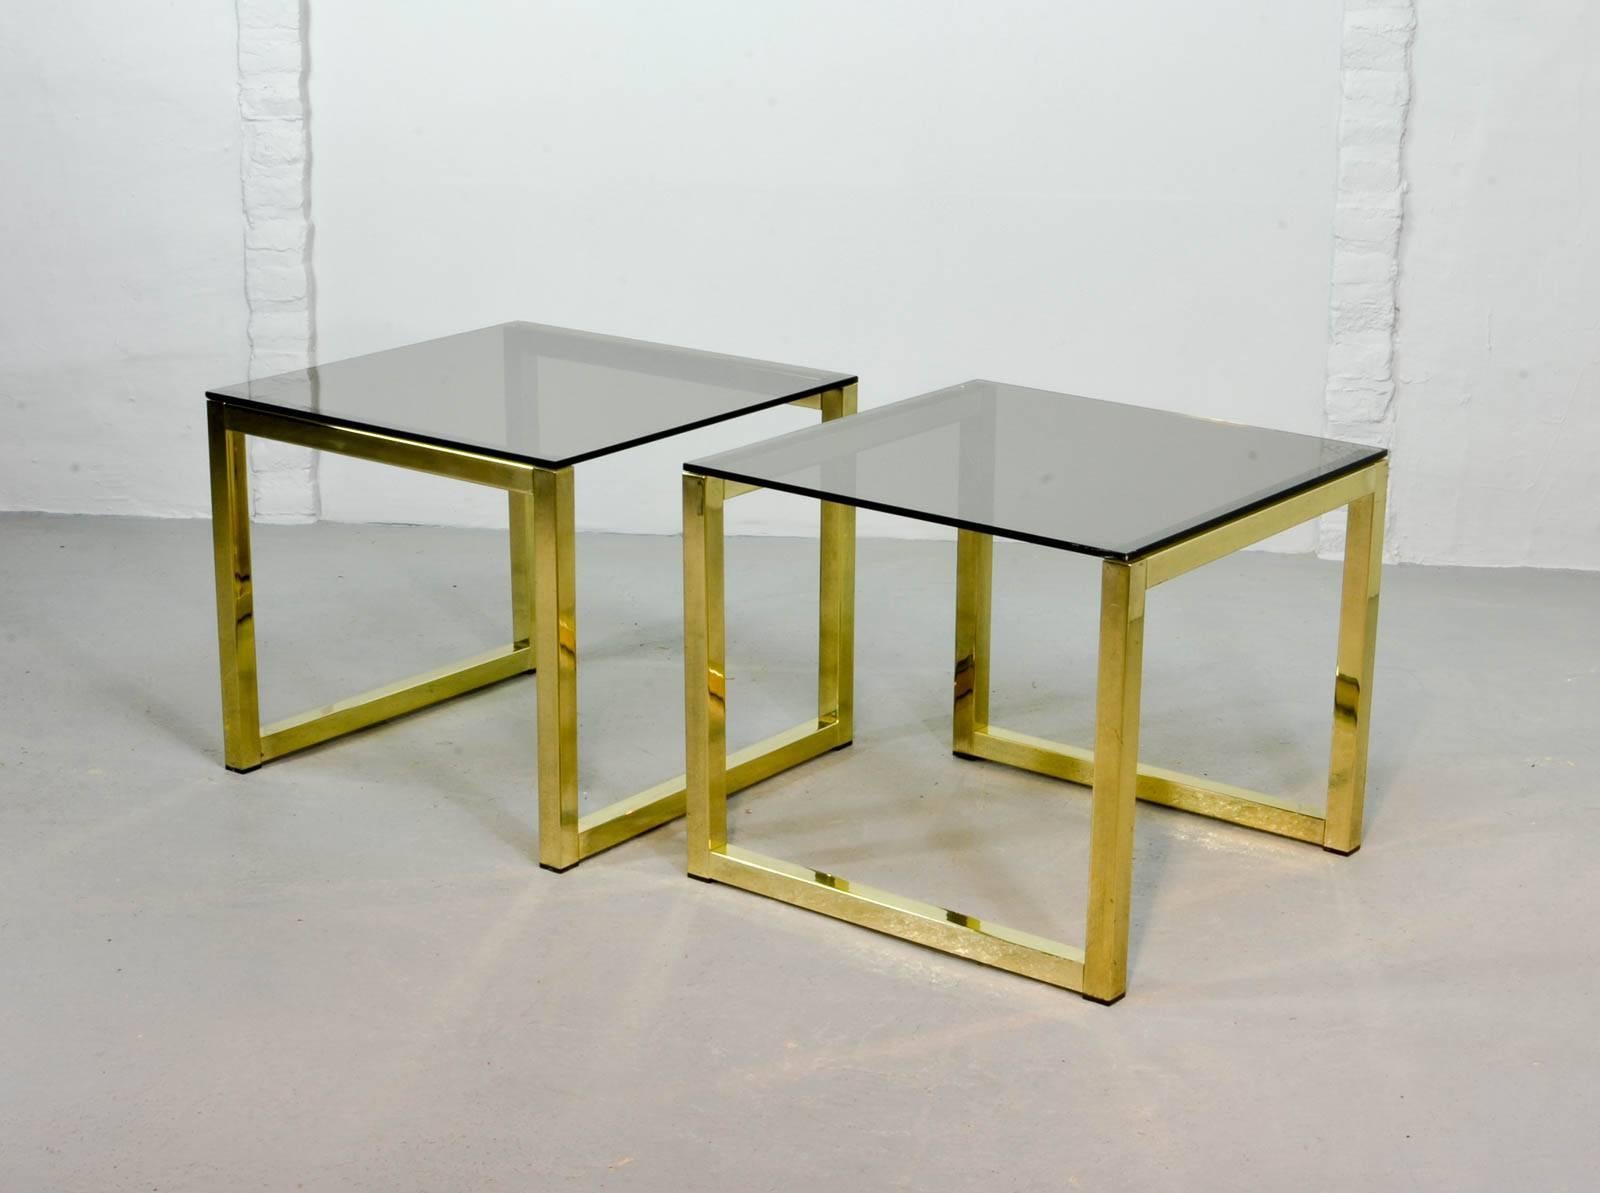 Pair of gold gilded chrome cubic tables with a thick smokey glass top. Manufactured in the 1980’s.
Can be used either as side tables or coffee tables. Fits very well in a Hollywood Regency oriented interior. The set is very well preserved with only